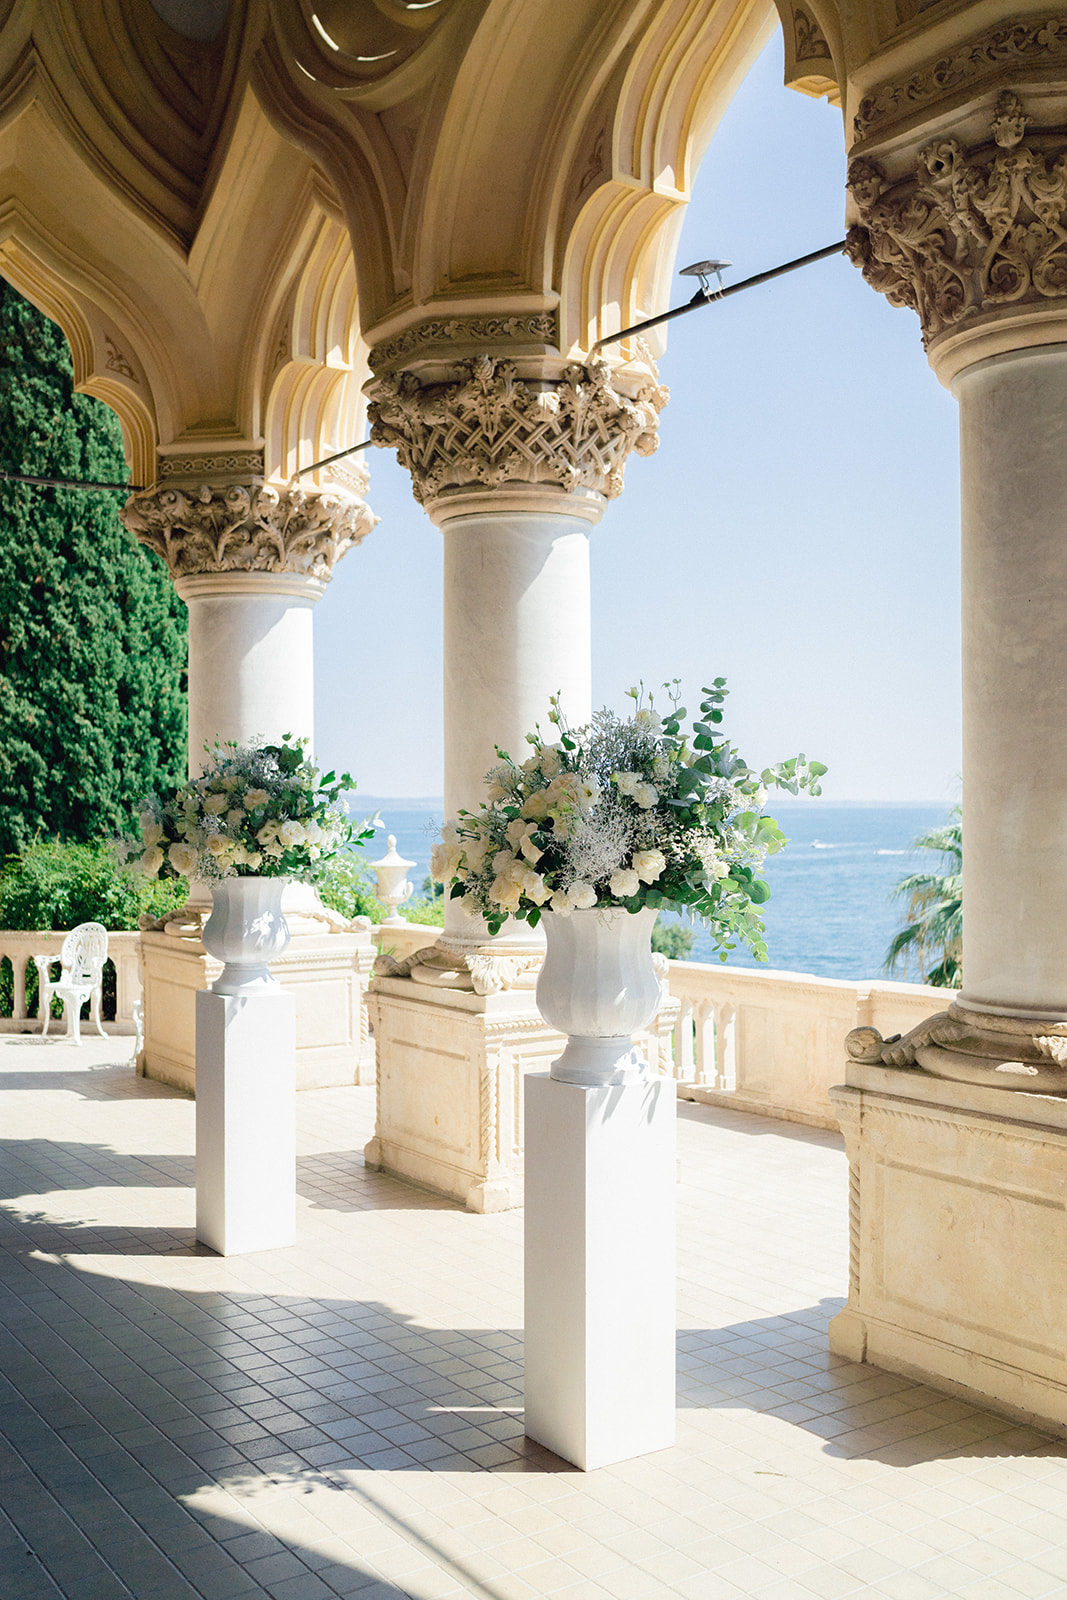 A glimpse of the columns of Isola del Garda and the wedding floral arrangements with a view on Lake Garda